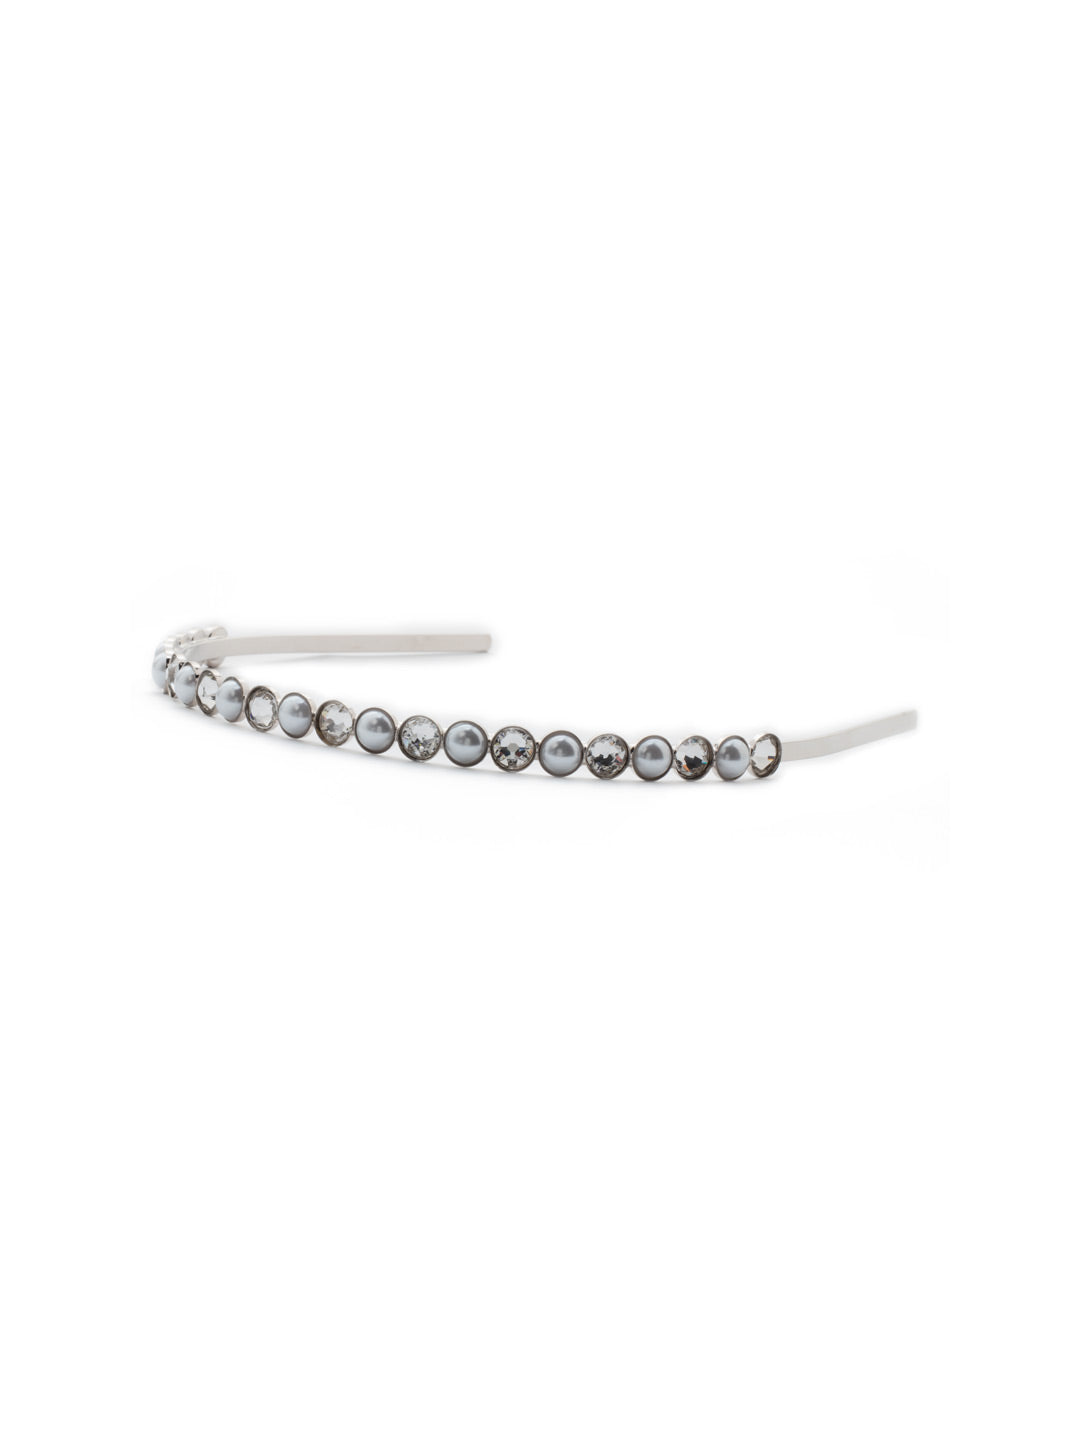 Alondra Headband - HET1RHMDP - <p>A headband with cystals, what more could you ask for? The Alondra headband is perfect for any special occasion. From Sorrelli's Modern Pearl collection in our Palladium Silver-tone finish.</p>